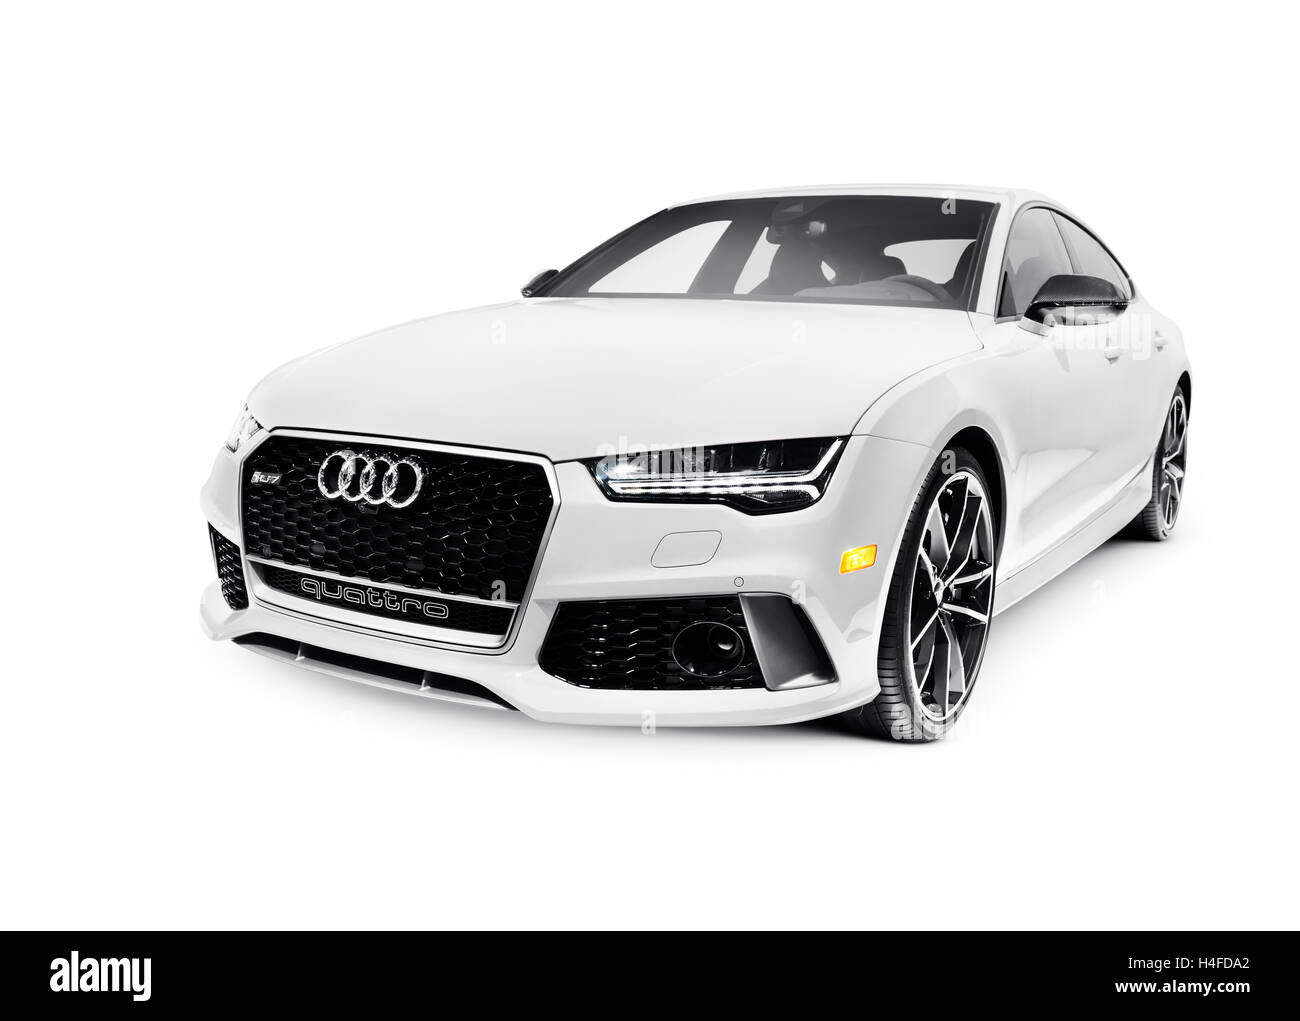 License and prints at MaximImages.com - 2016 Audi RS 7 Prestige Quattro Sedan luxury car isolated on white background with clipping path Stock Photo